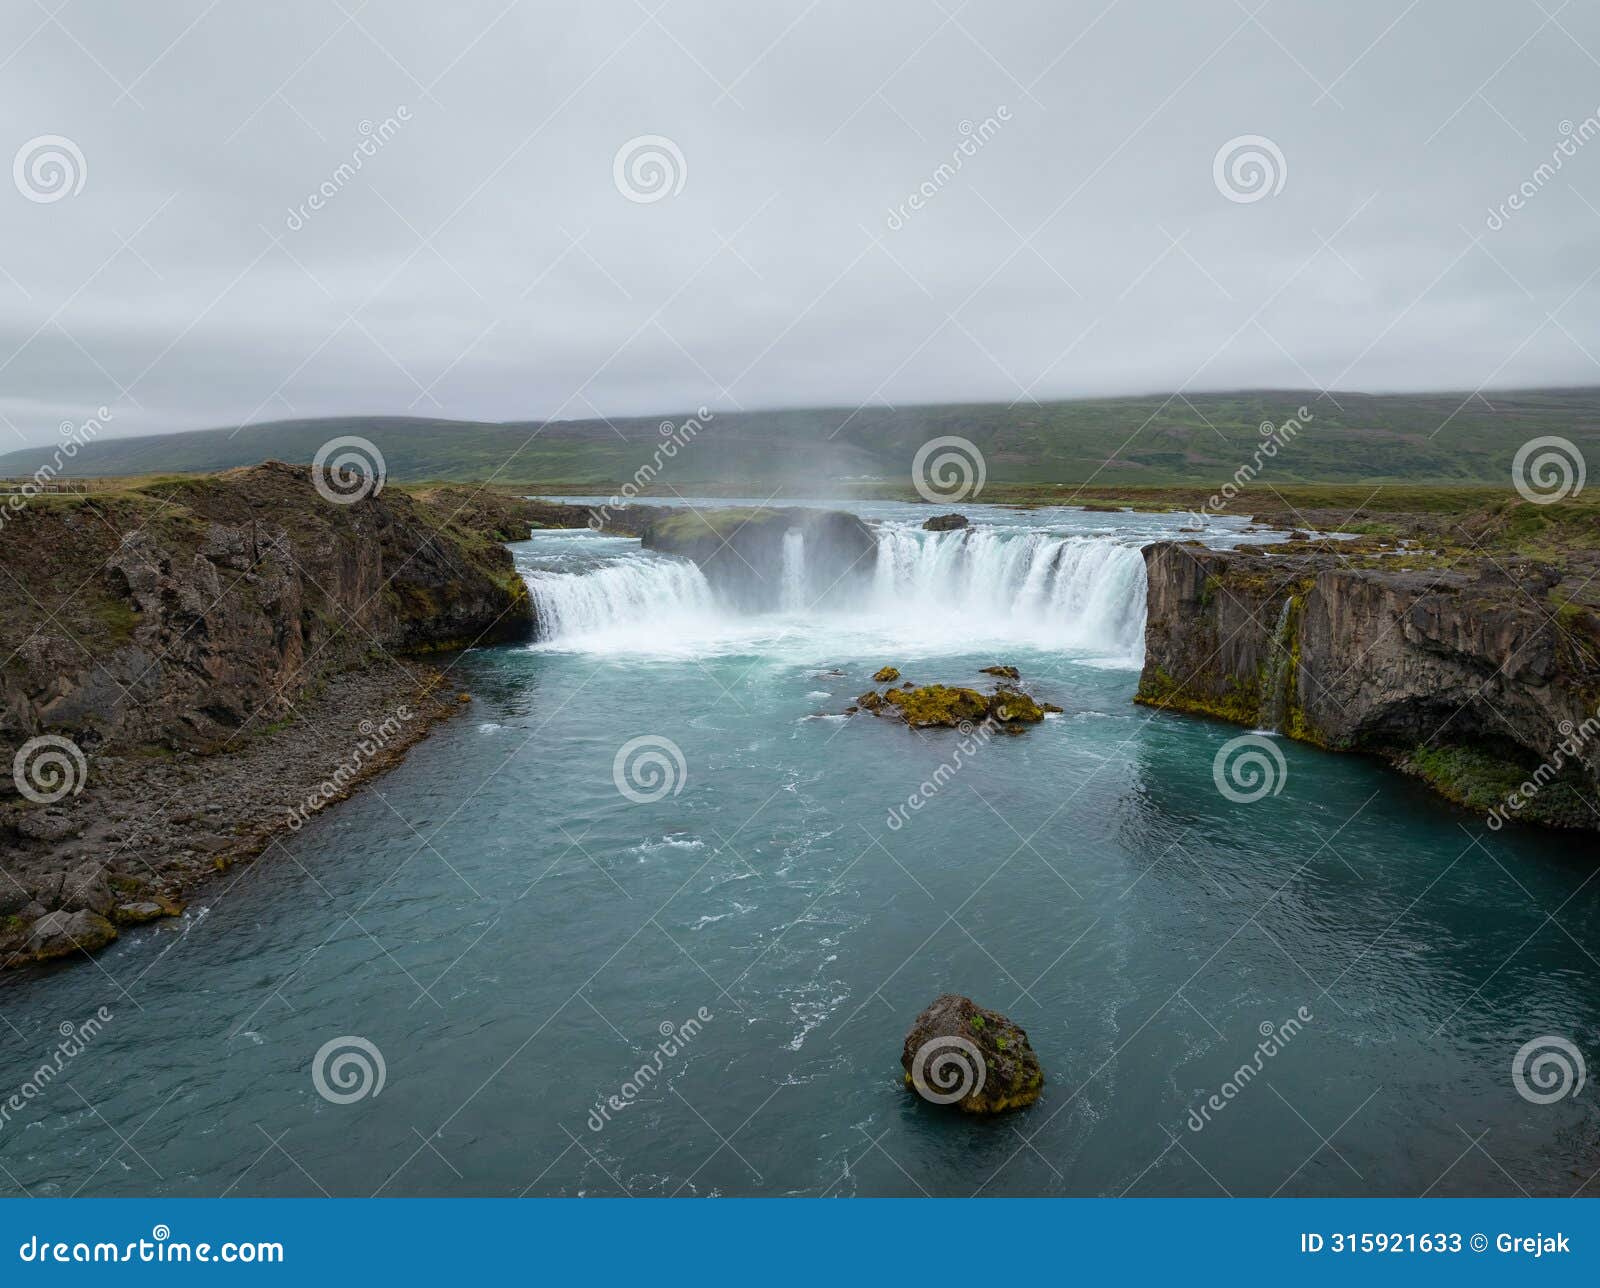 godafoss waterfall in iceland and its incredible surroundings, aerial view